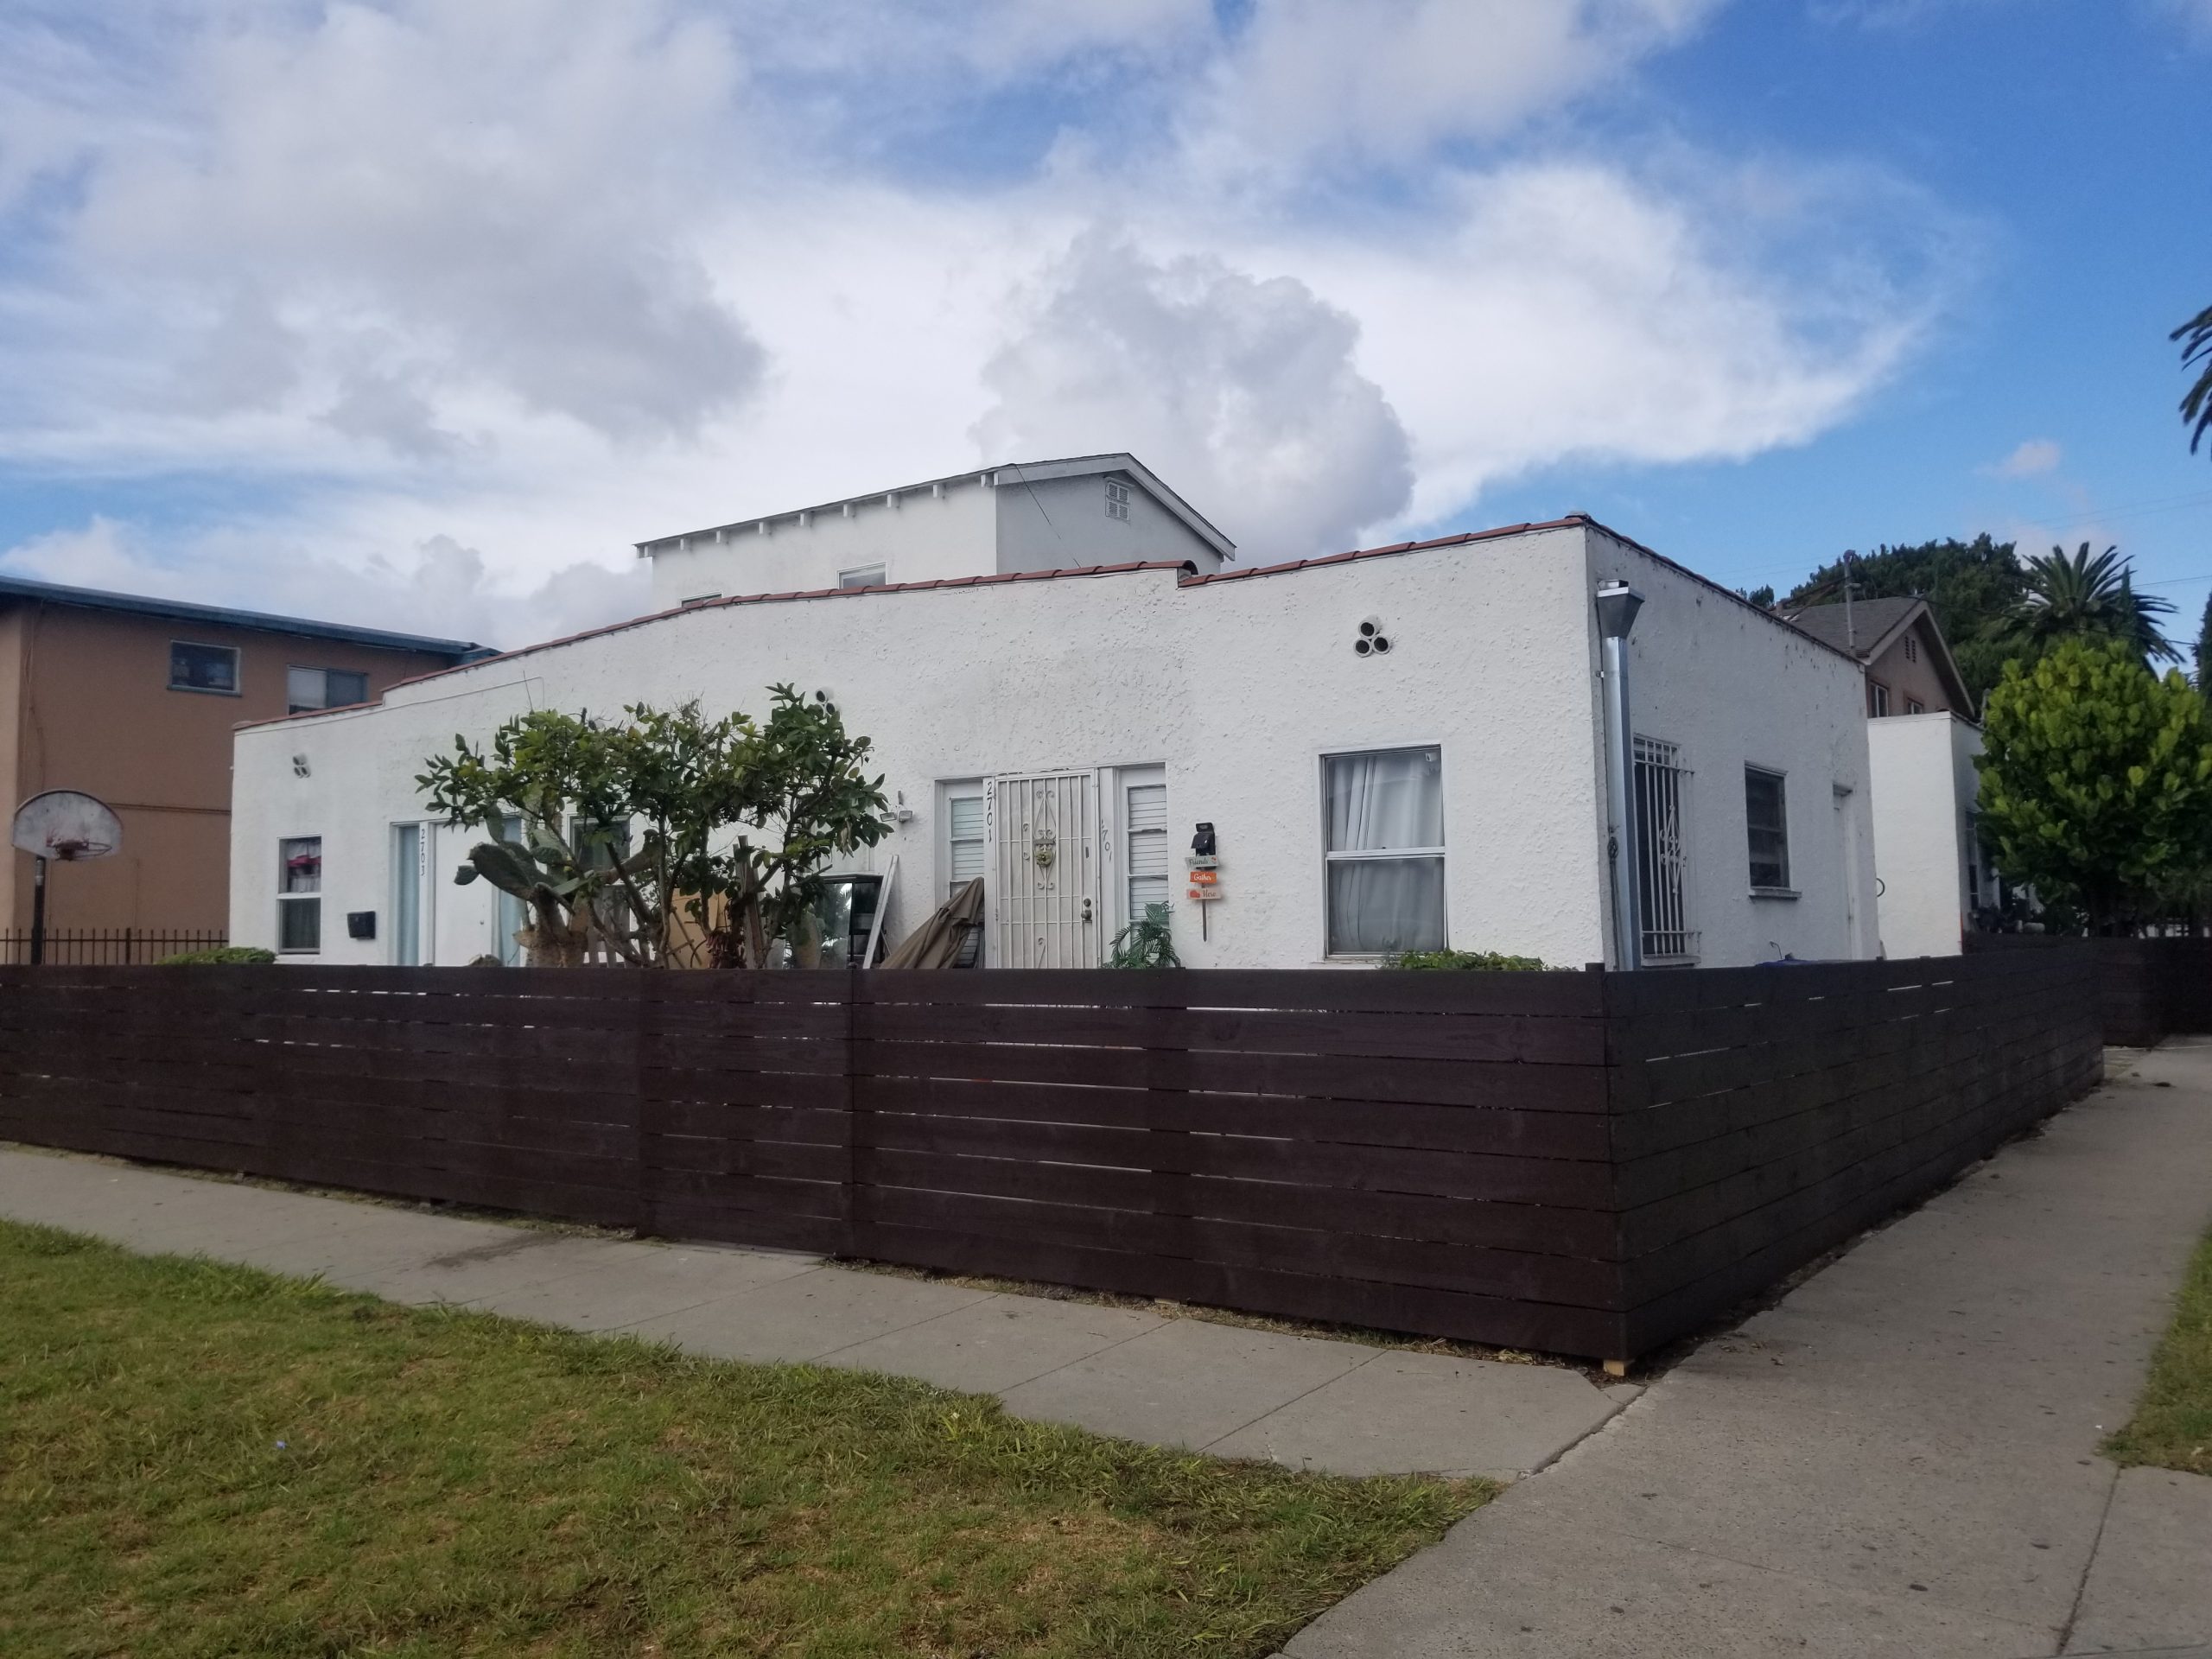 Property - 2701 S. Cloverdale Los Angeles, CA 90016